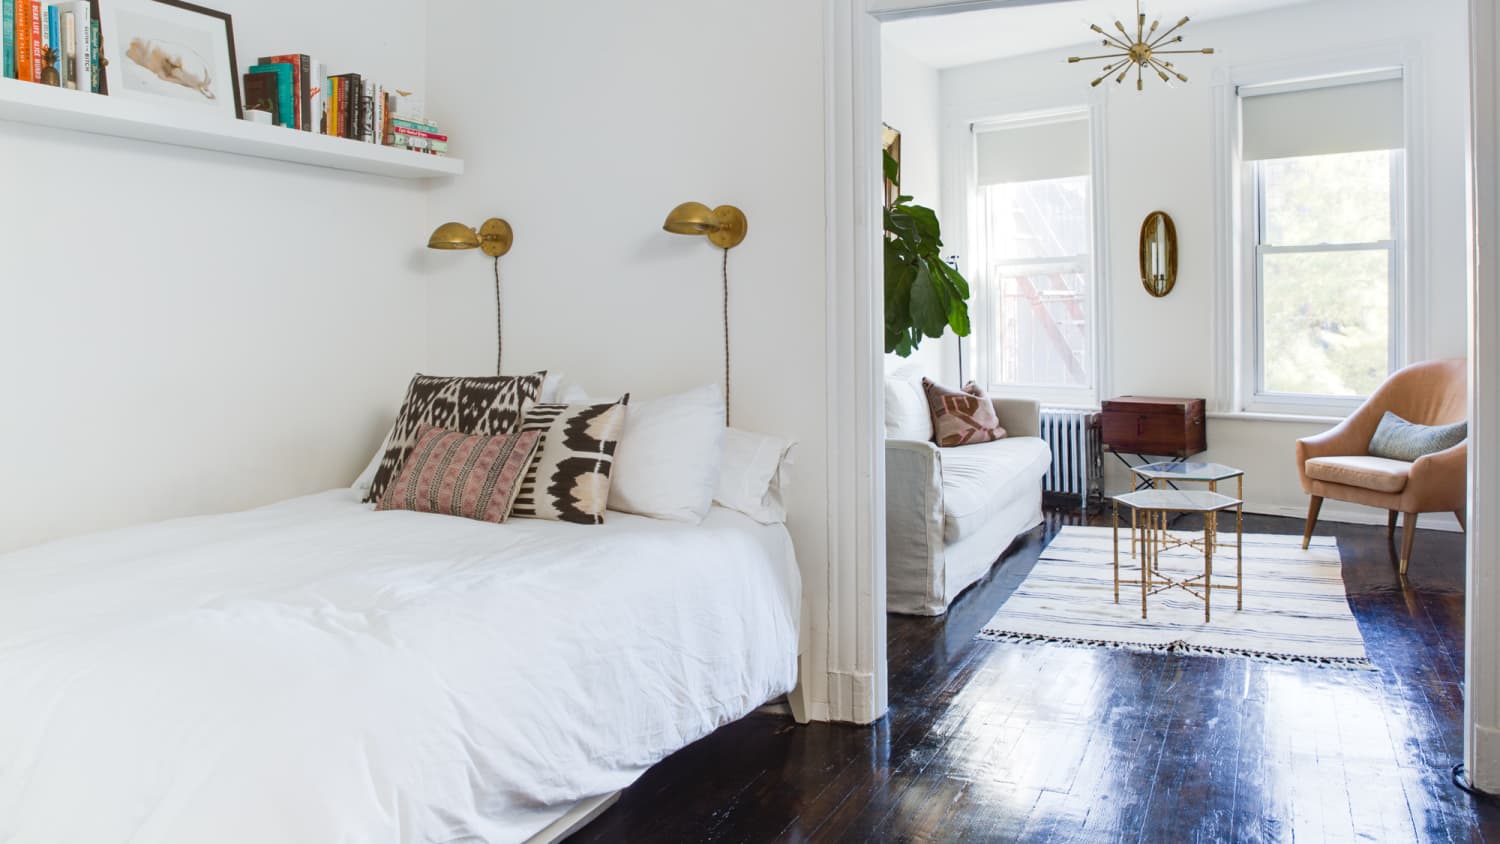 How to Arrange Bedroom Furniture for the Ultimate Sleeping Space